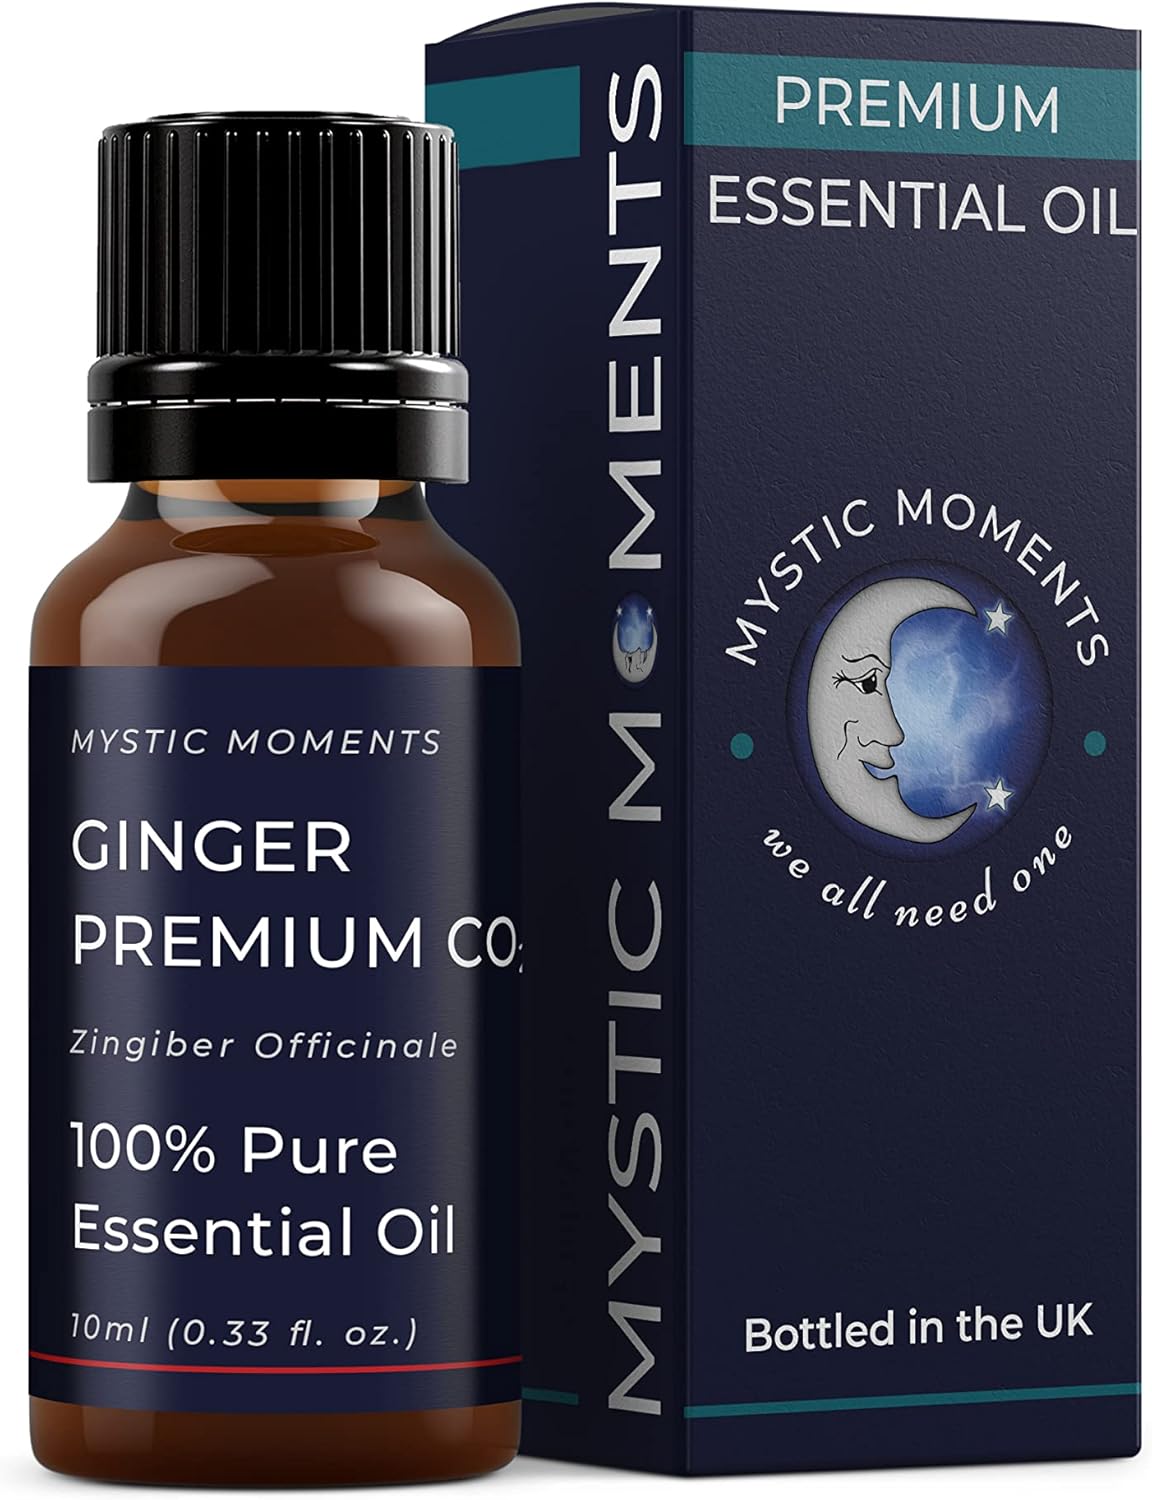 Mystic Moments | Ginger Premium CO2 Essential Oil 10ml - Pure & Natural oil for Diffusers, Aromatherapy & Massage Blends Vegan GMO Free